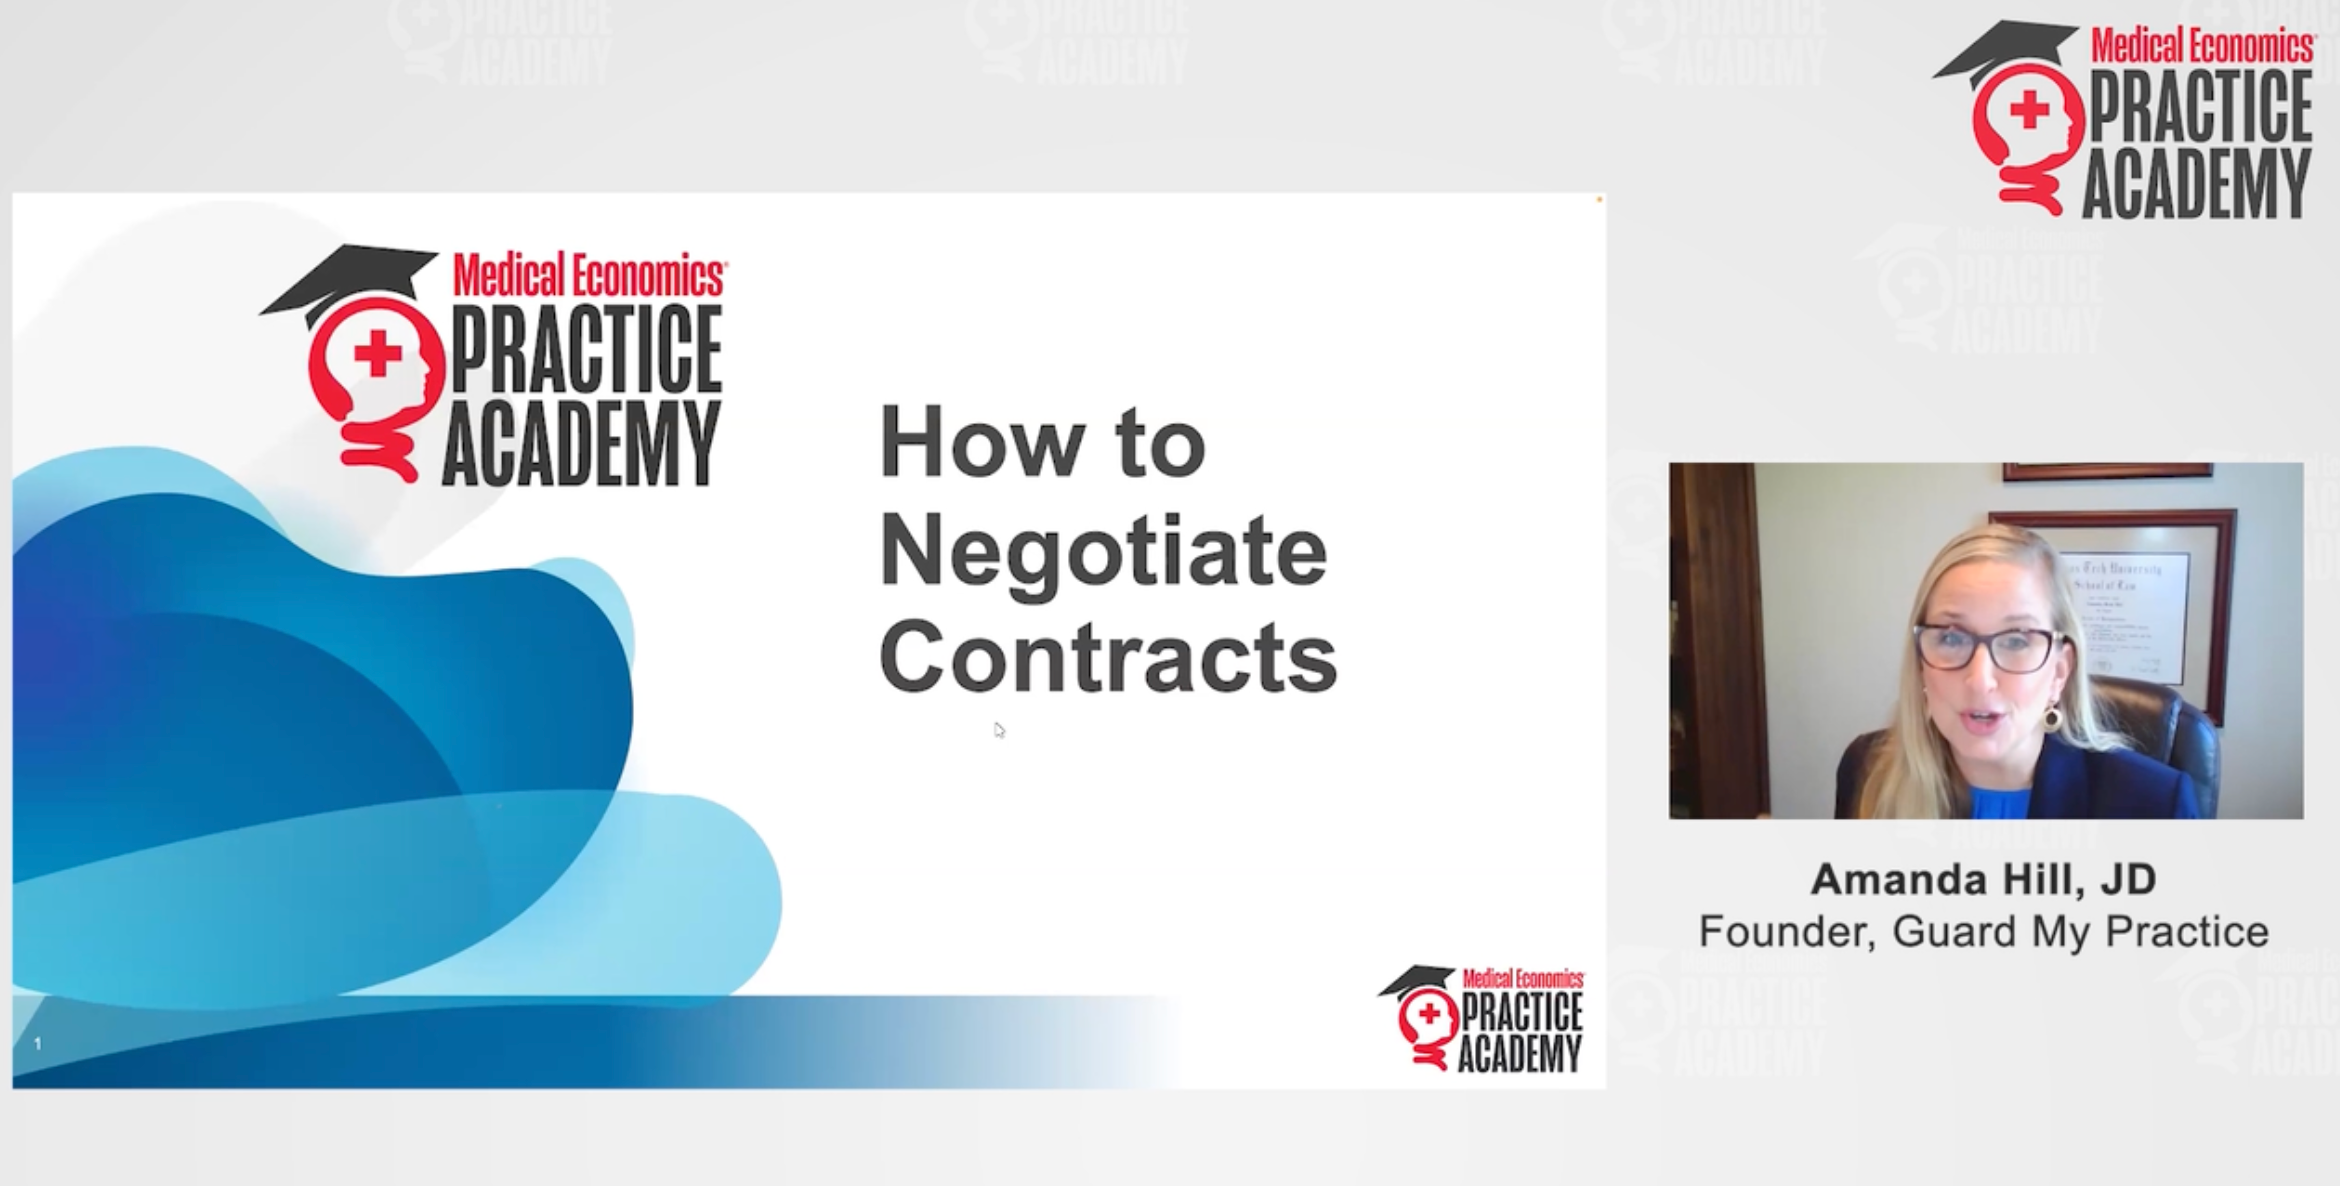 Contract negotiation best practices for physicians